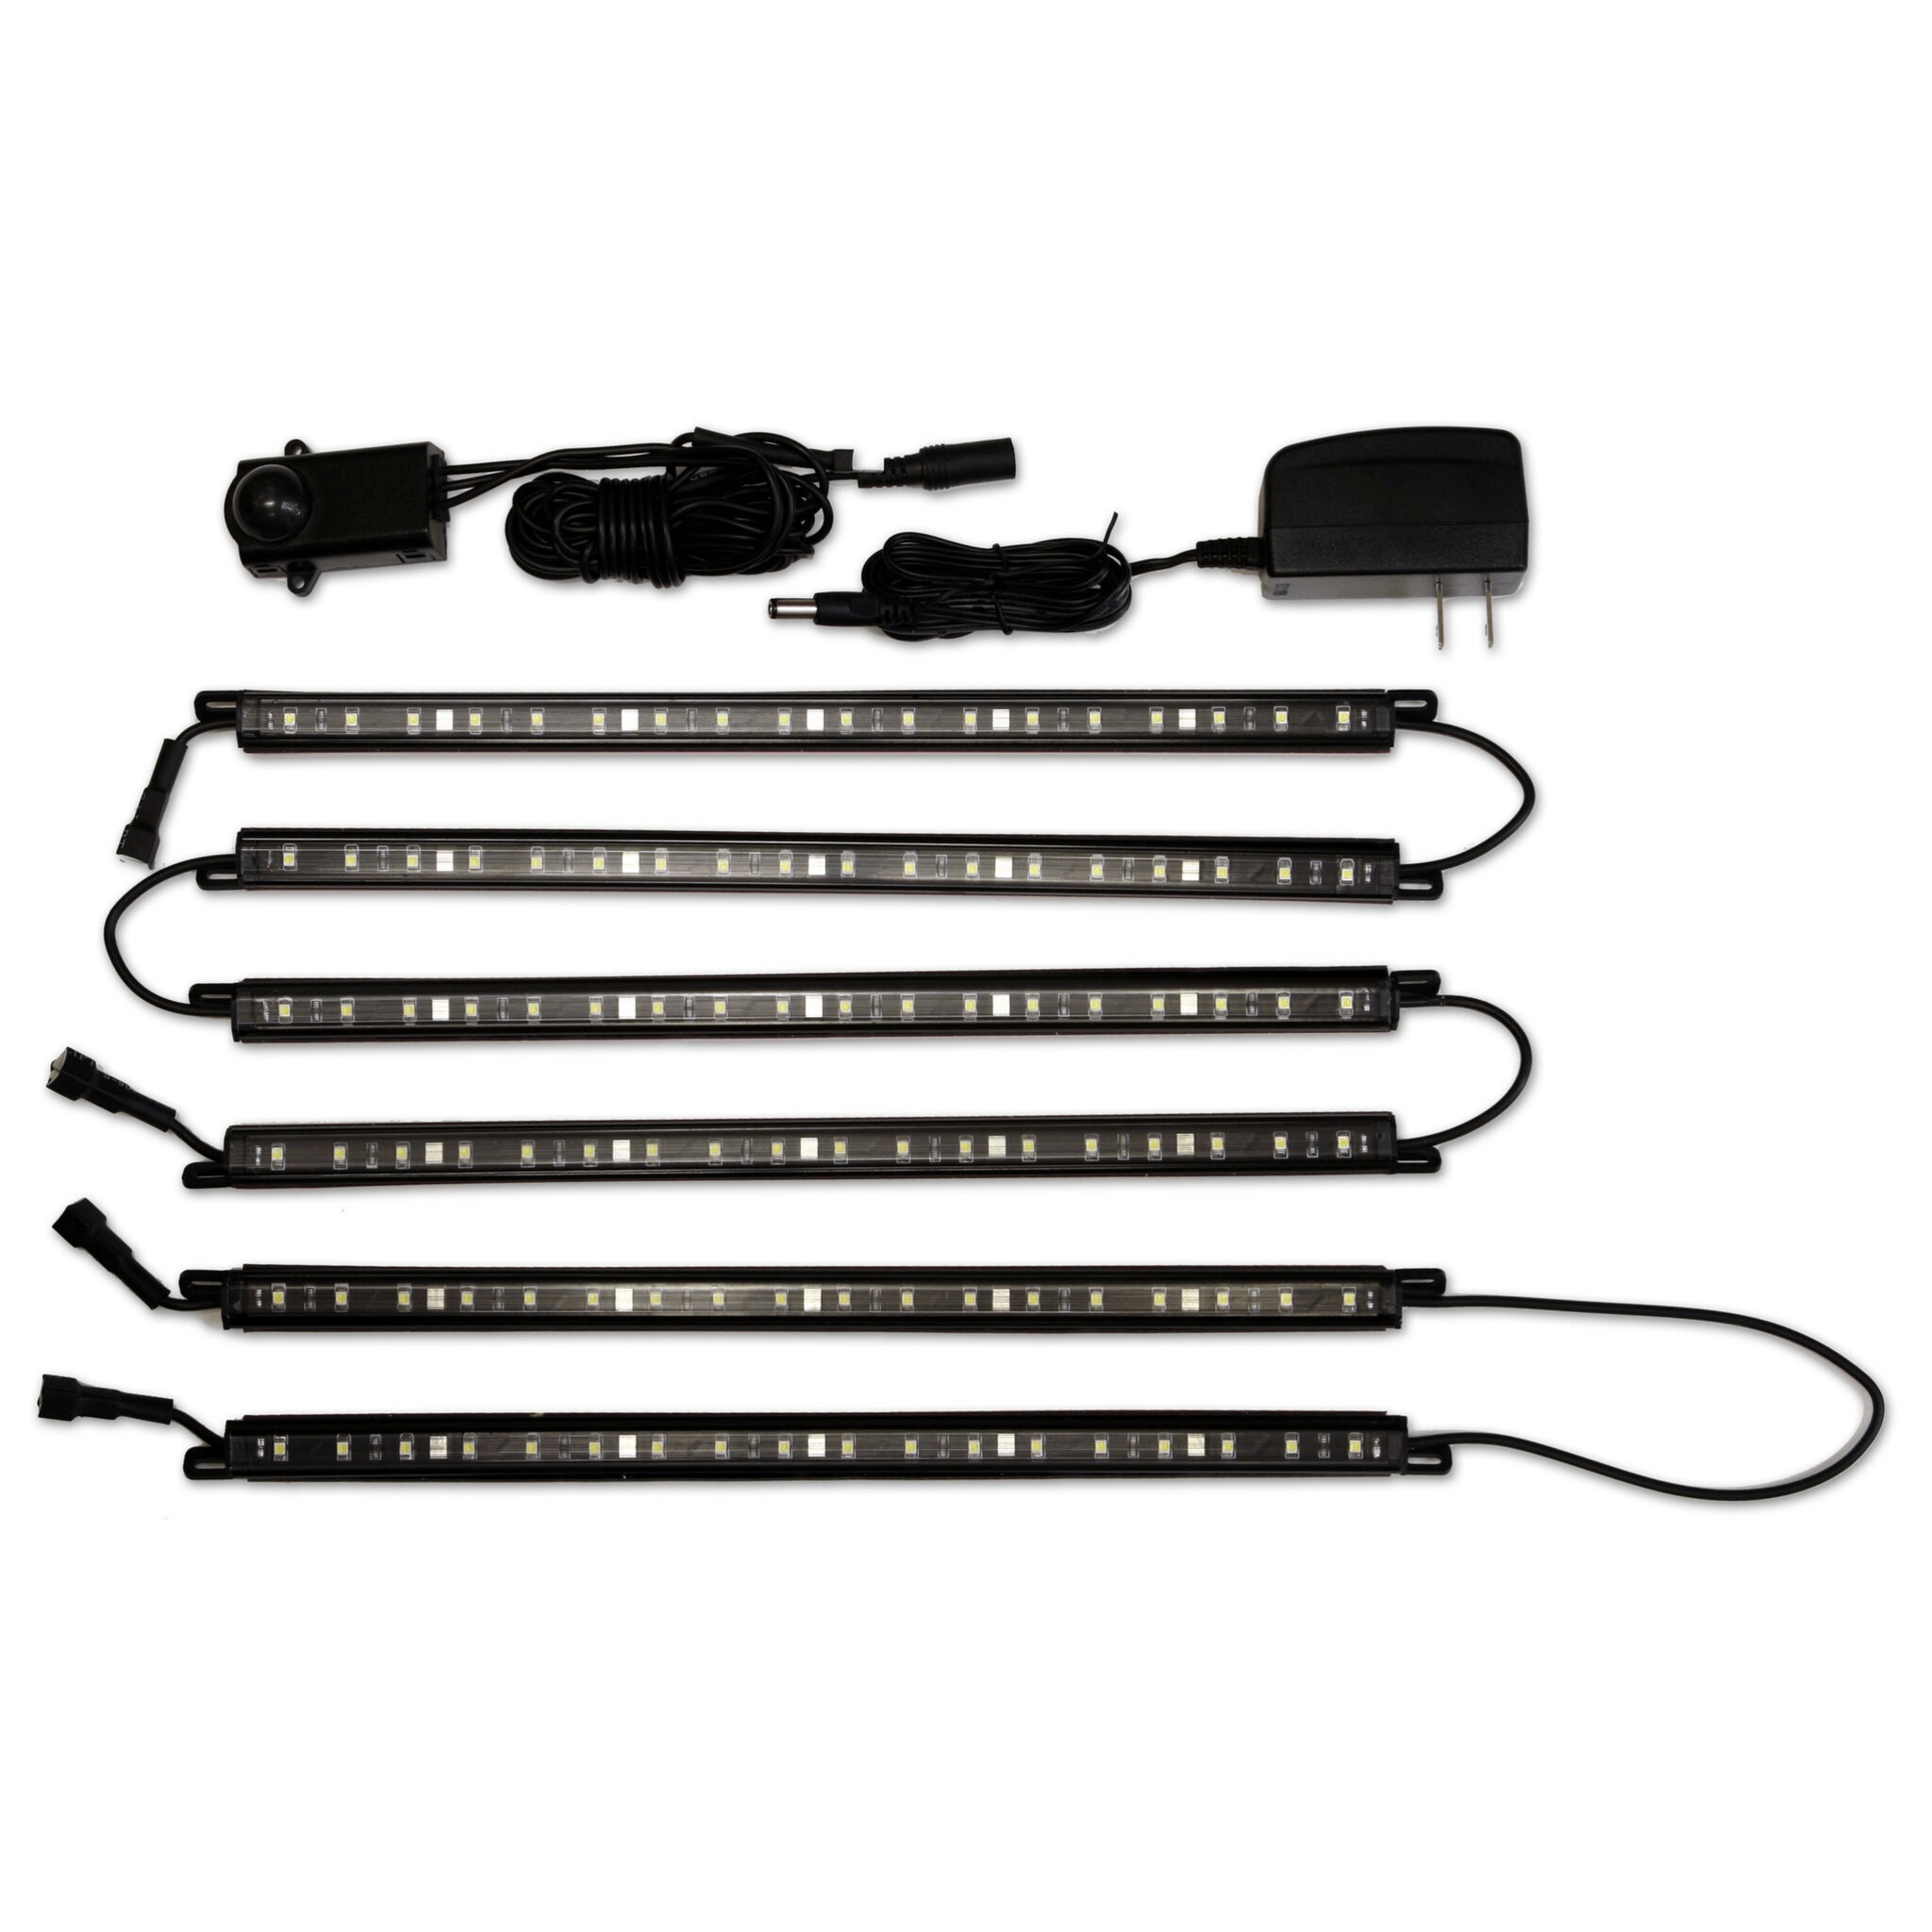 Accessory - Lights - Clearview Safe Light Kit - (6 wand lights), photo 1